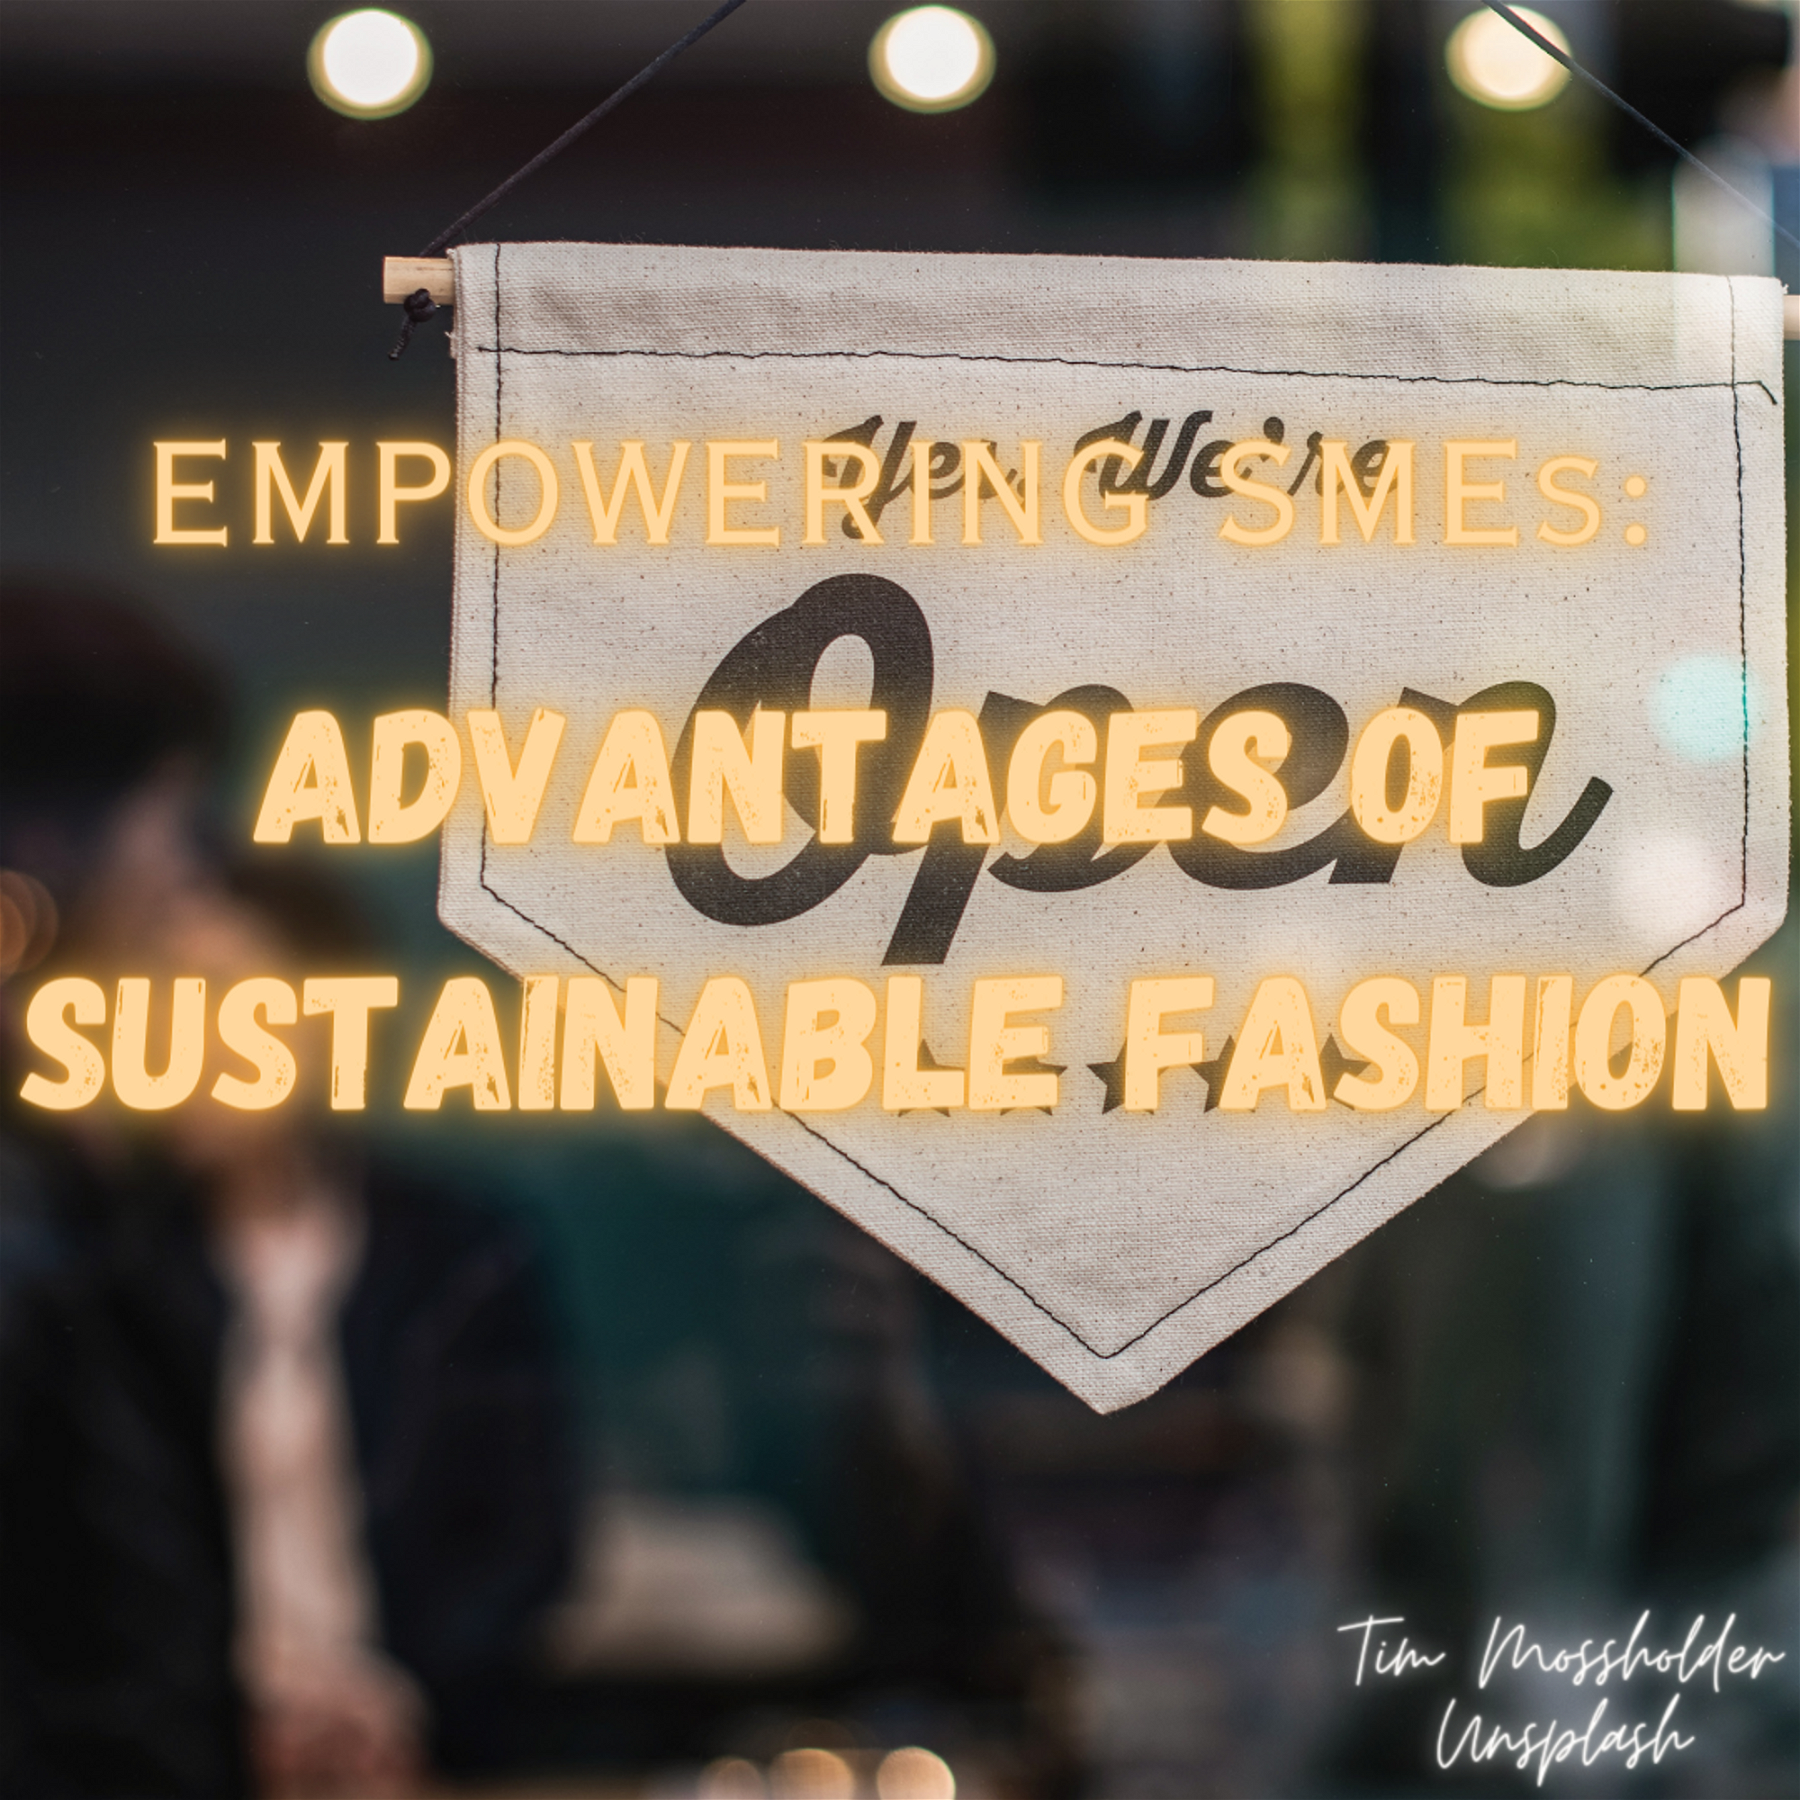 Empowering Small and Medium-Sized Enterprises (SMEs): The Advantages of Sustainable Fashion